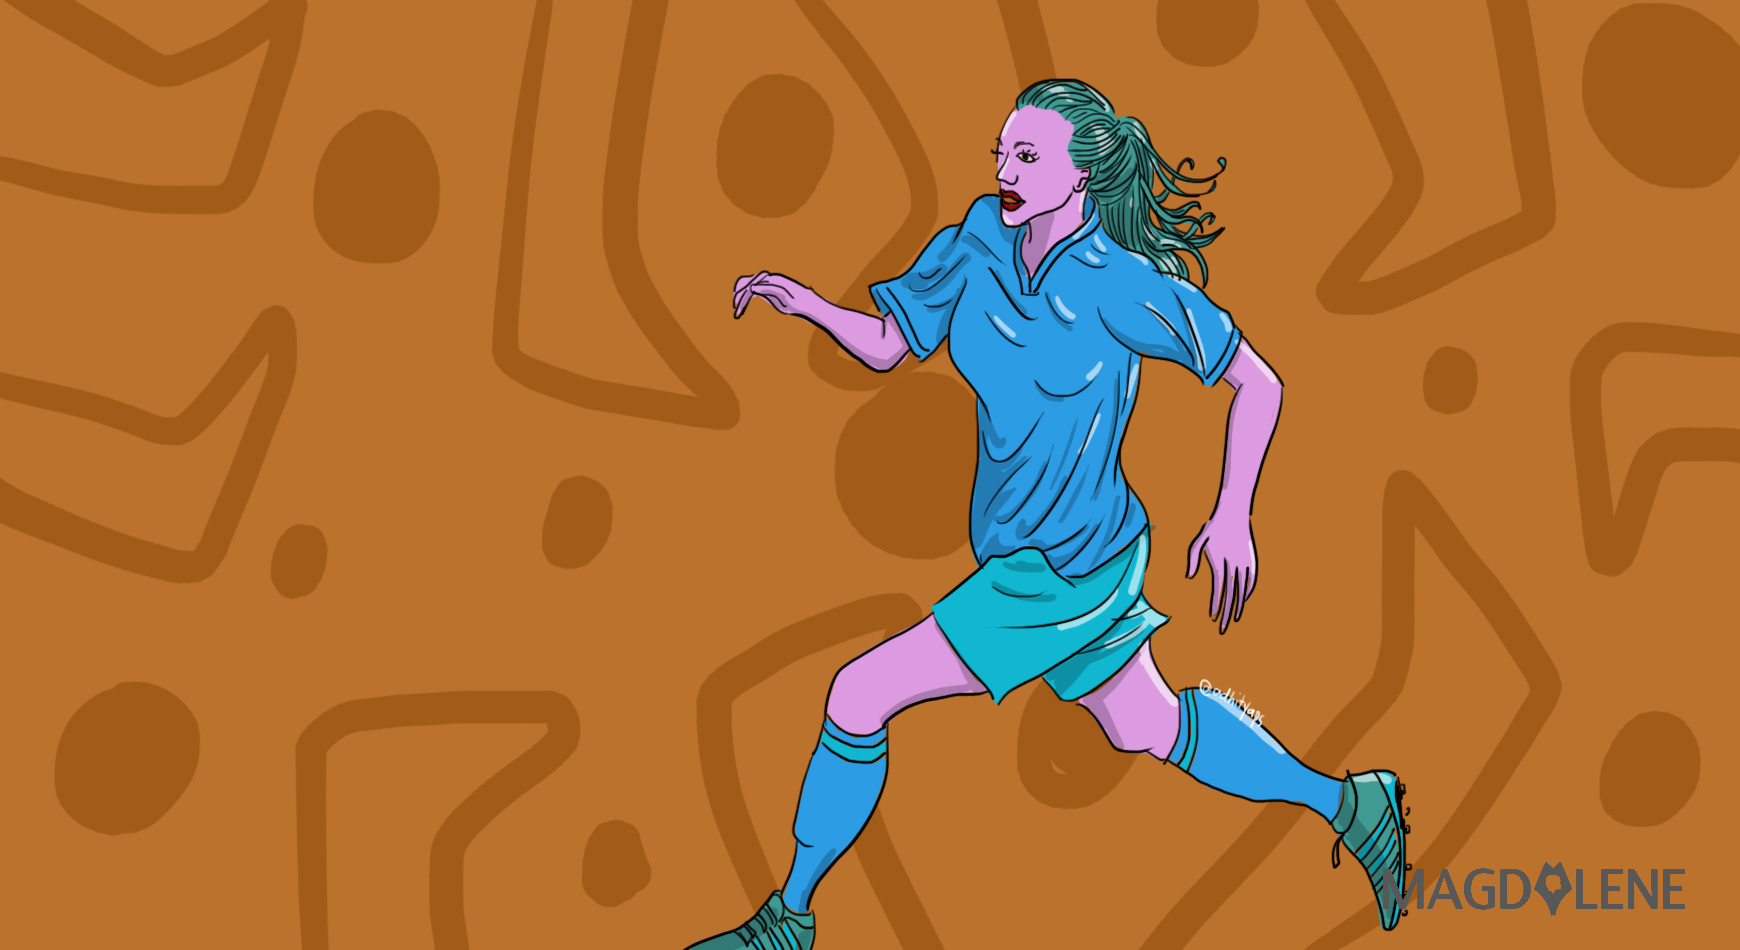 Underpaid and Legally Unprotected: The Plight of Women’s Footballer